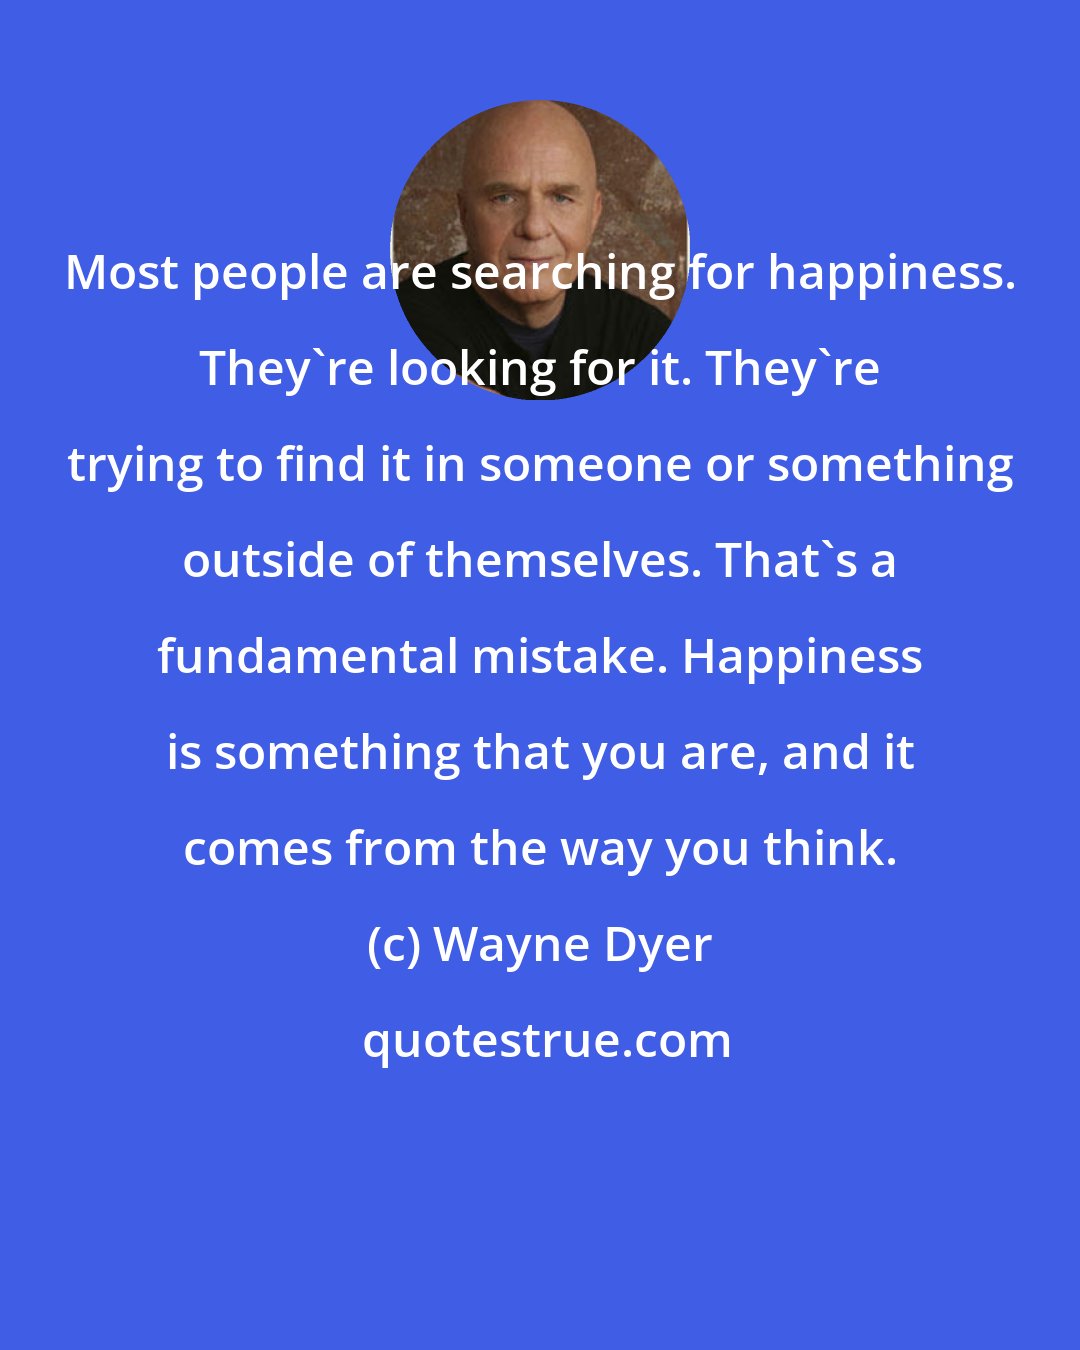 Wayne Dyer: Most people are searching for happiness. They're looking for it. They're trying to find it in someone or something outside of themselves. That's a fundamental mistake. Happiness is something that you are, and it comes from the way you think.